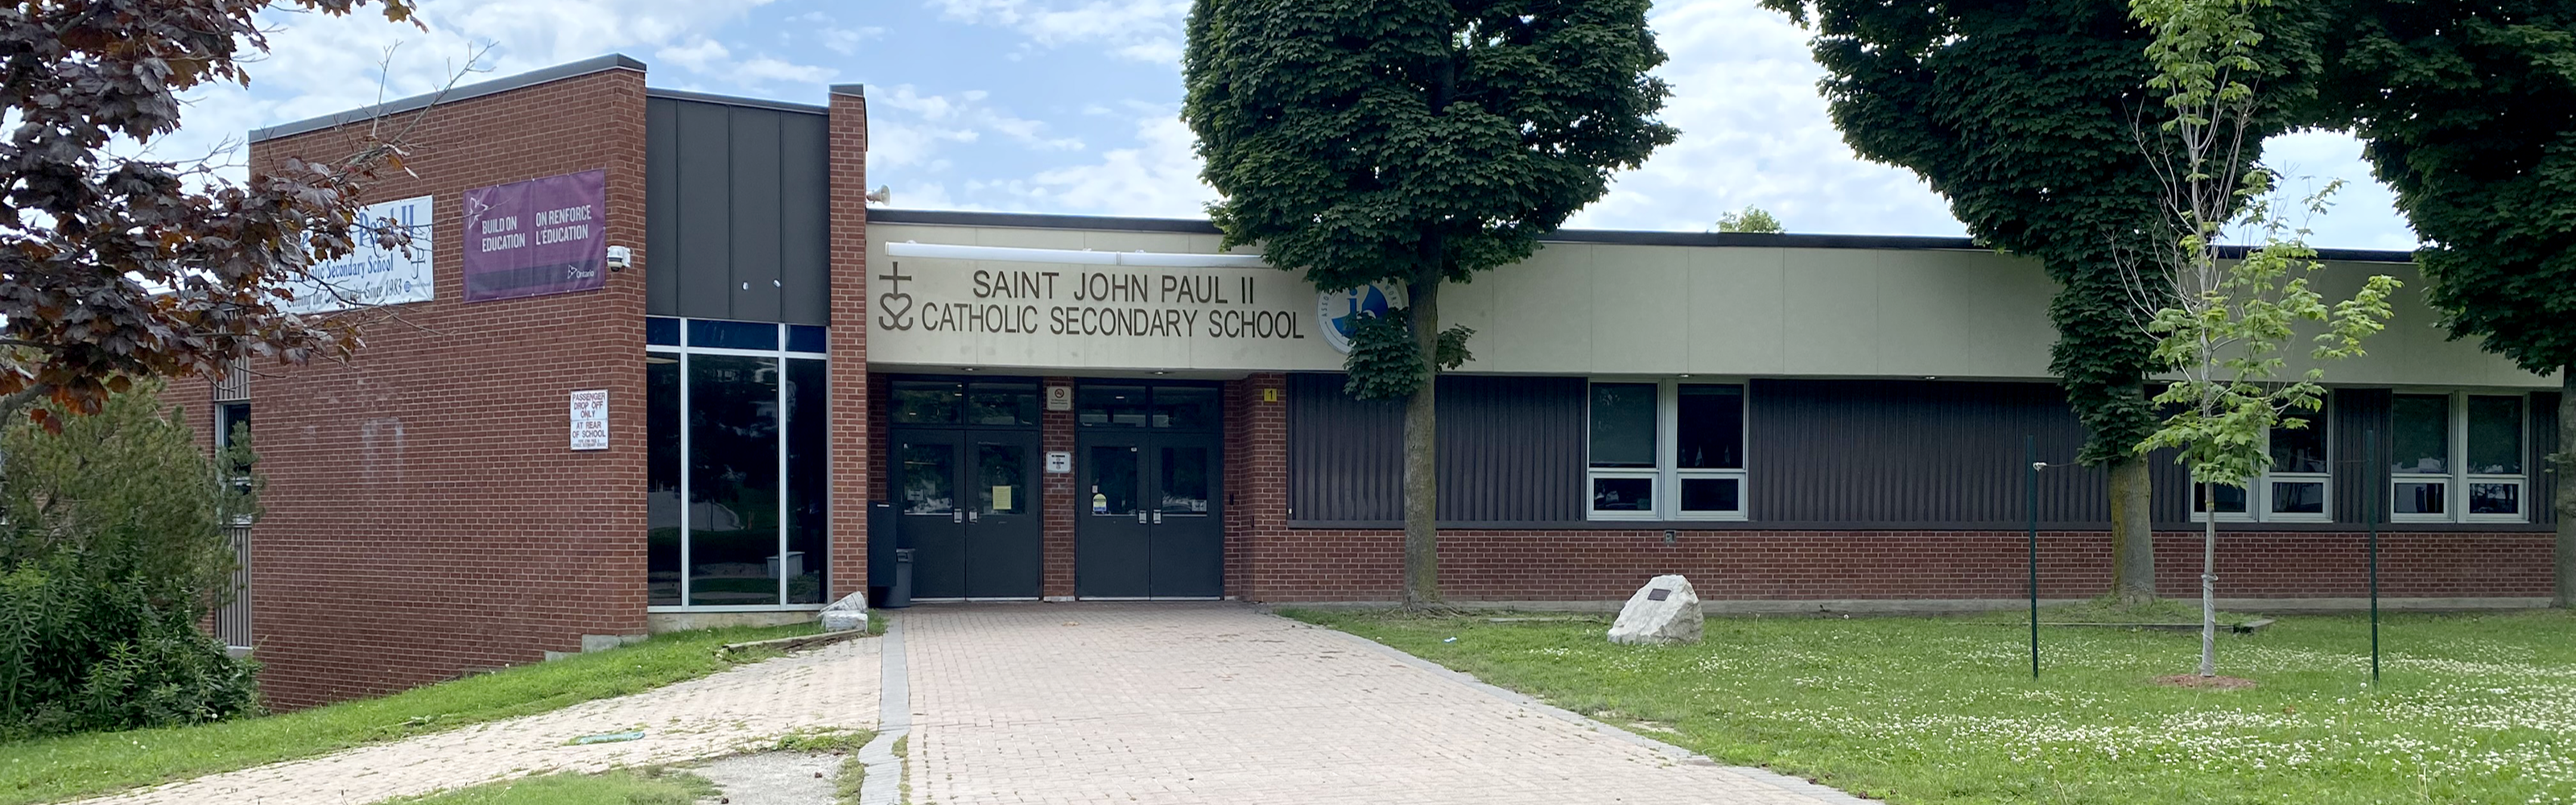 The front of the St. John Paul II Catholic Secondary School building.